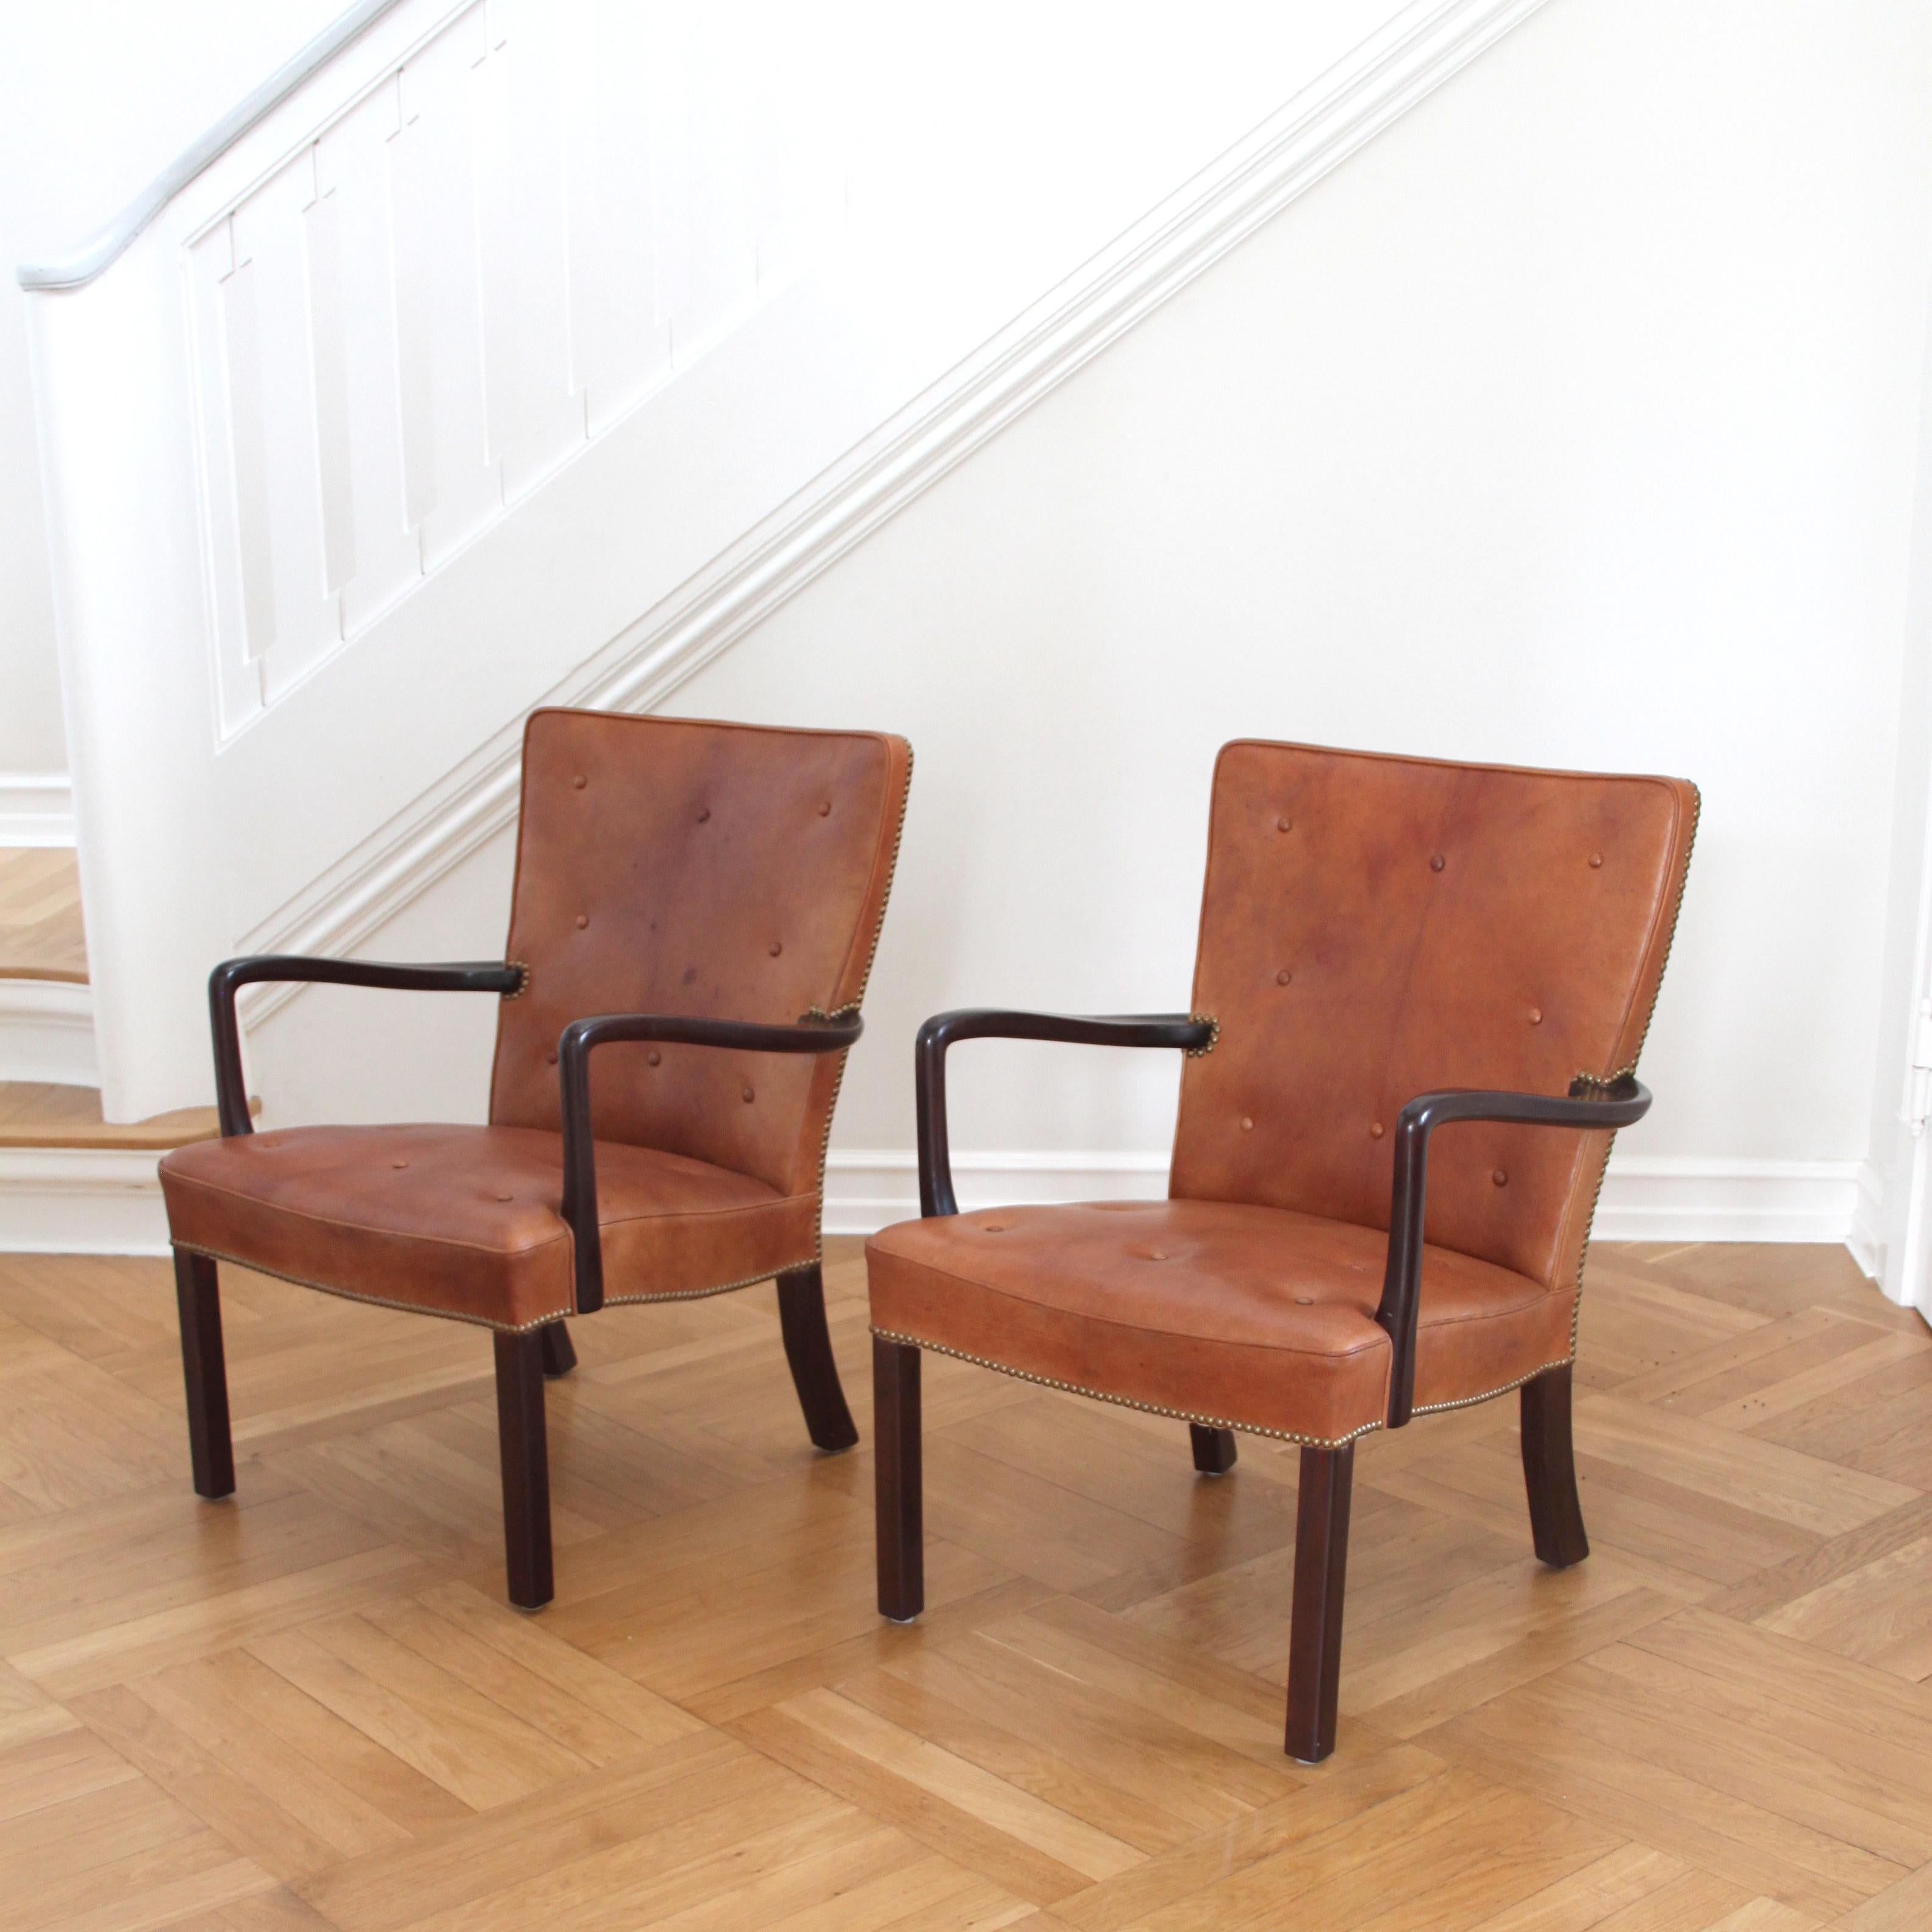 JACOB KJÆR - SCANDINAVIAN MODERN

A beautiful pair of lounge chairs, designed and manufactured by cabinetmaker Jacob Kjær (1896-1957).

Materials: Dark stained mahogany and upholstered in Nigerian leather with buttens and brass